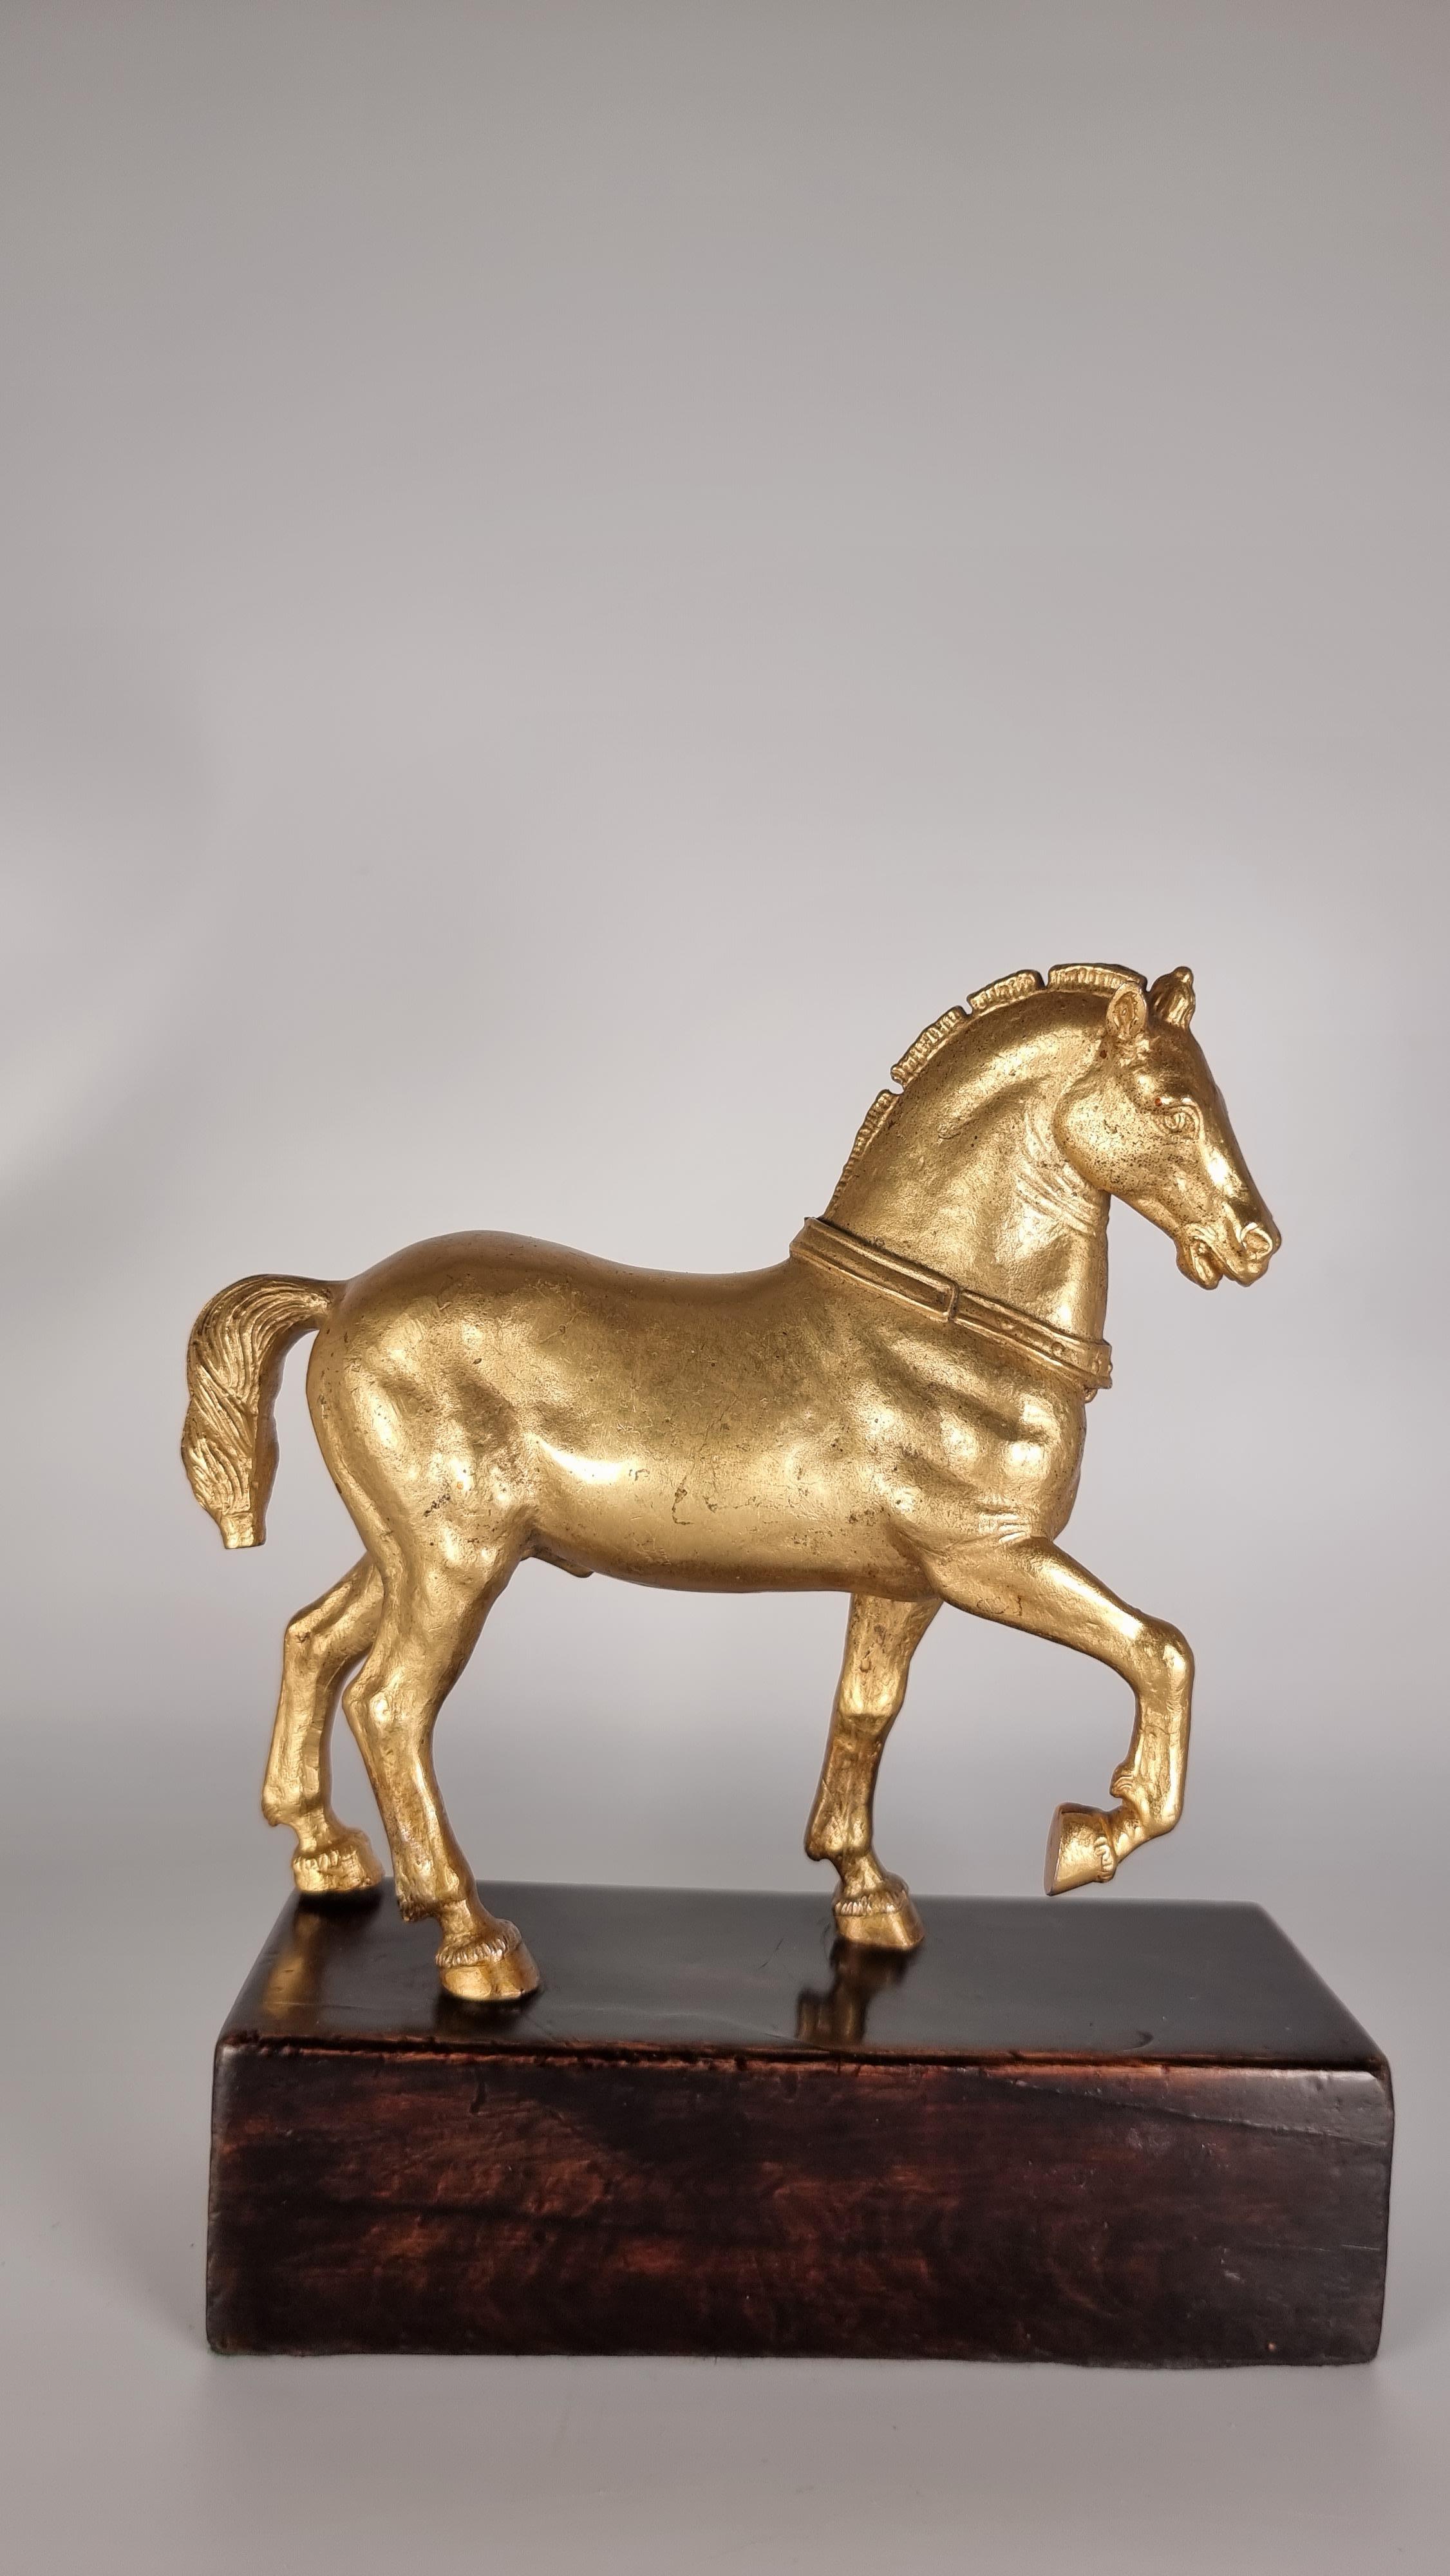 This superb pair of Grand Tour Italian gilt bronzes dates to the late 19th century. They are solid cast and very heavy for their size. They are decorative Grand Tour reproductions taken from the original ones known as the St. Marks Balilica Horses